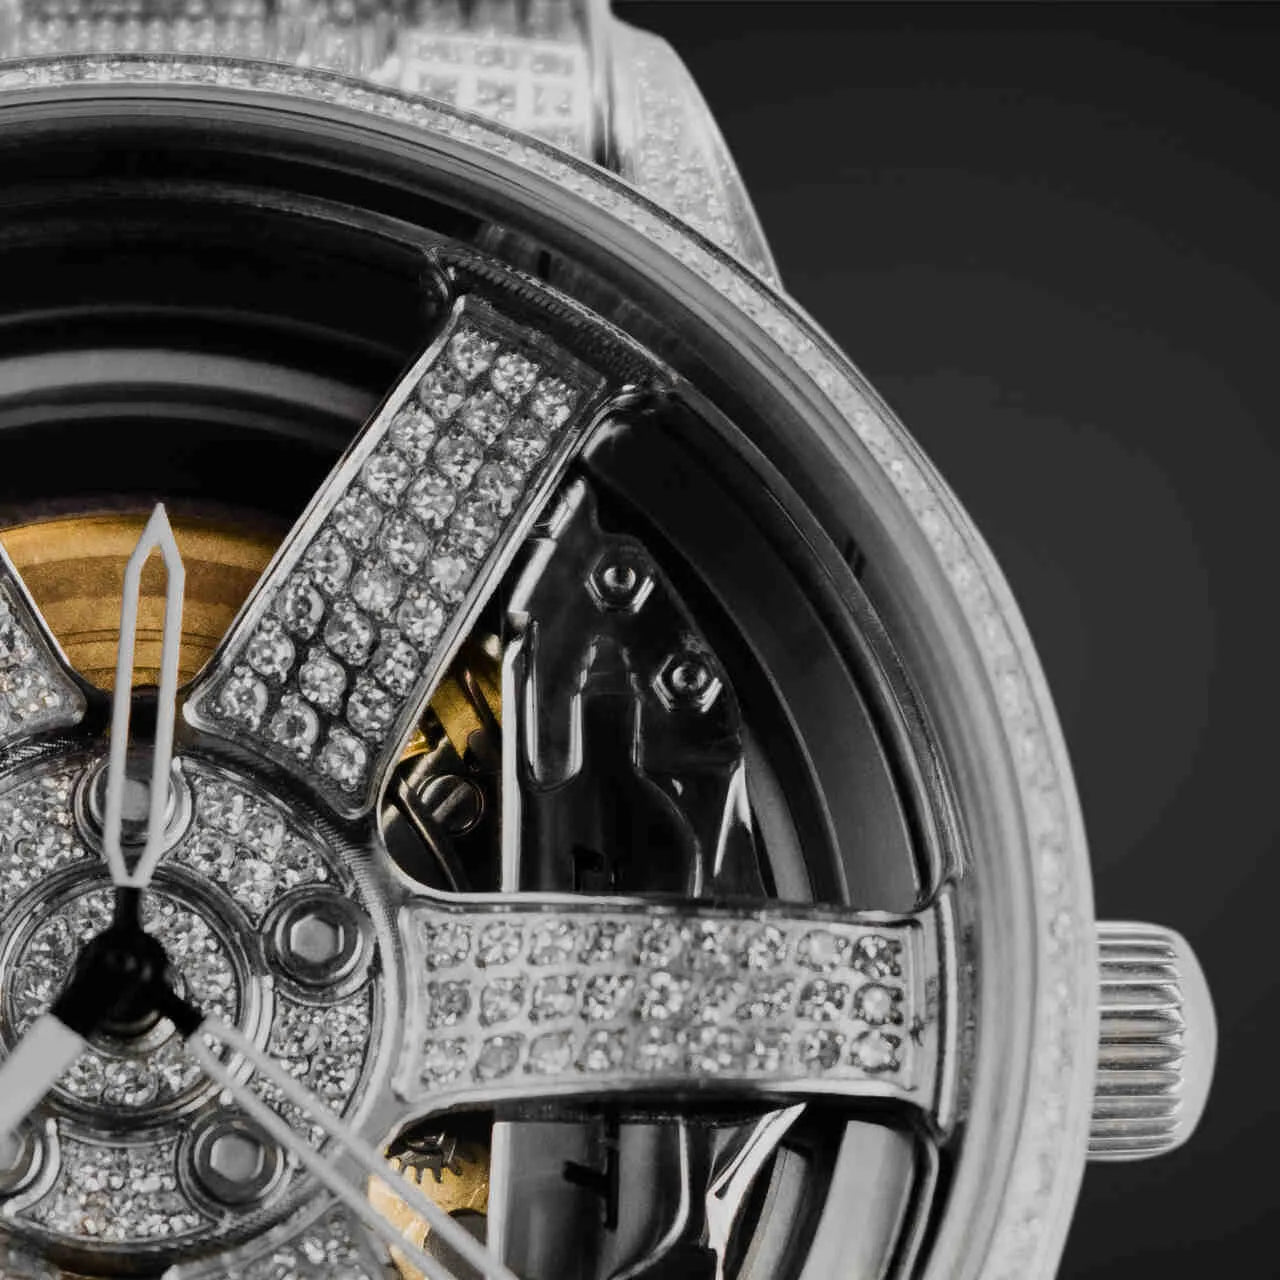 3RD ANNIVERSARY FELGENUHR ICED OUT VVS-EDITION